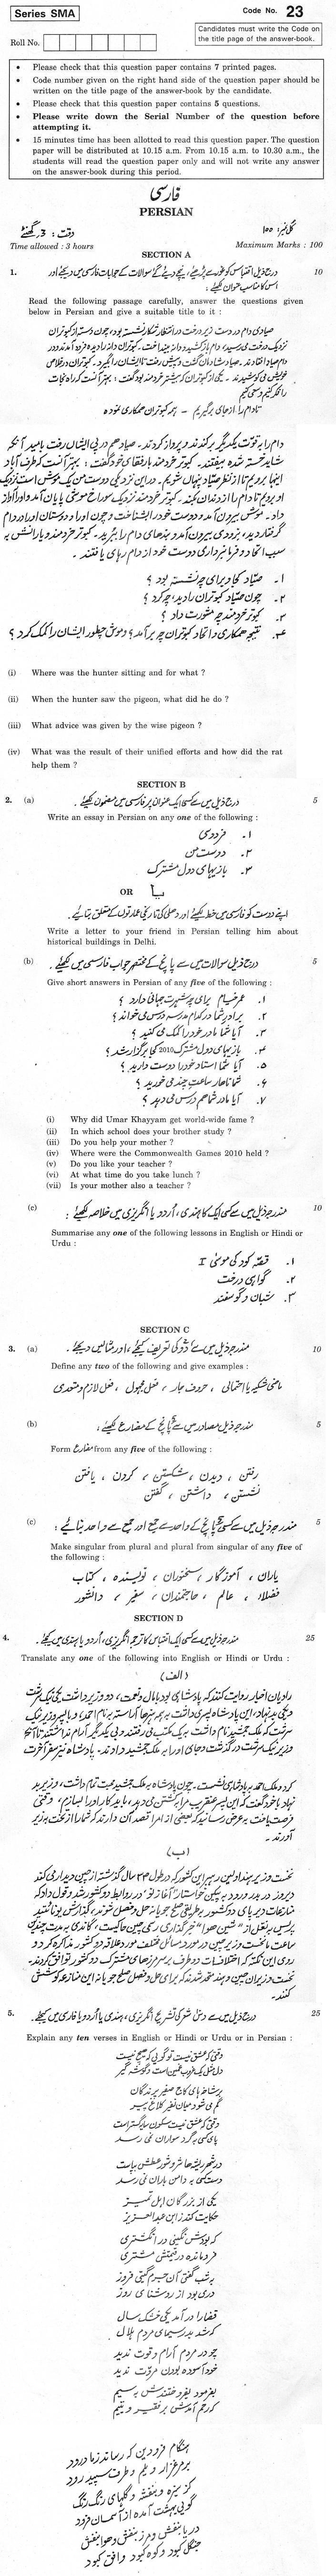 CBSE Class XII Previous Year Question Paper 2012 Persian